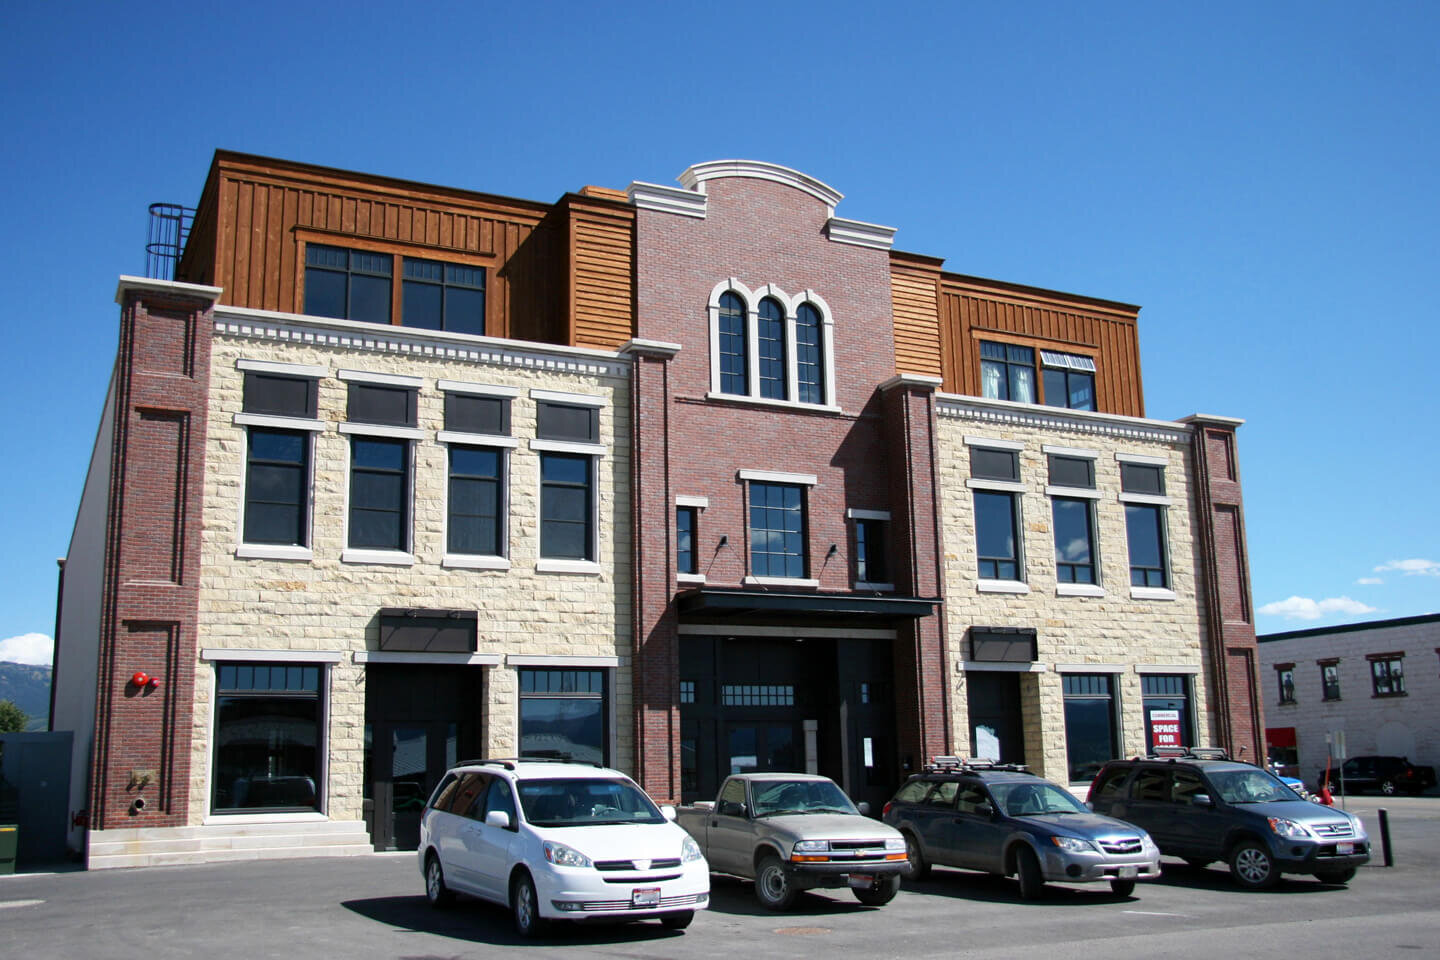 Exterior view of building with cars parked